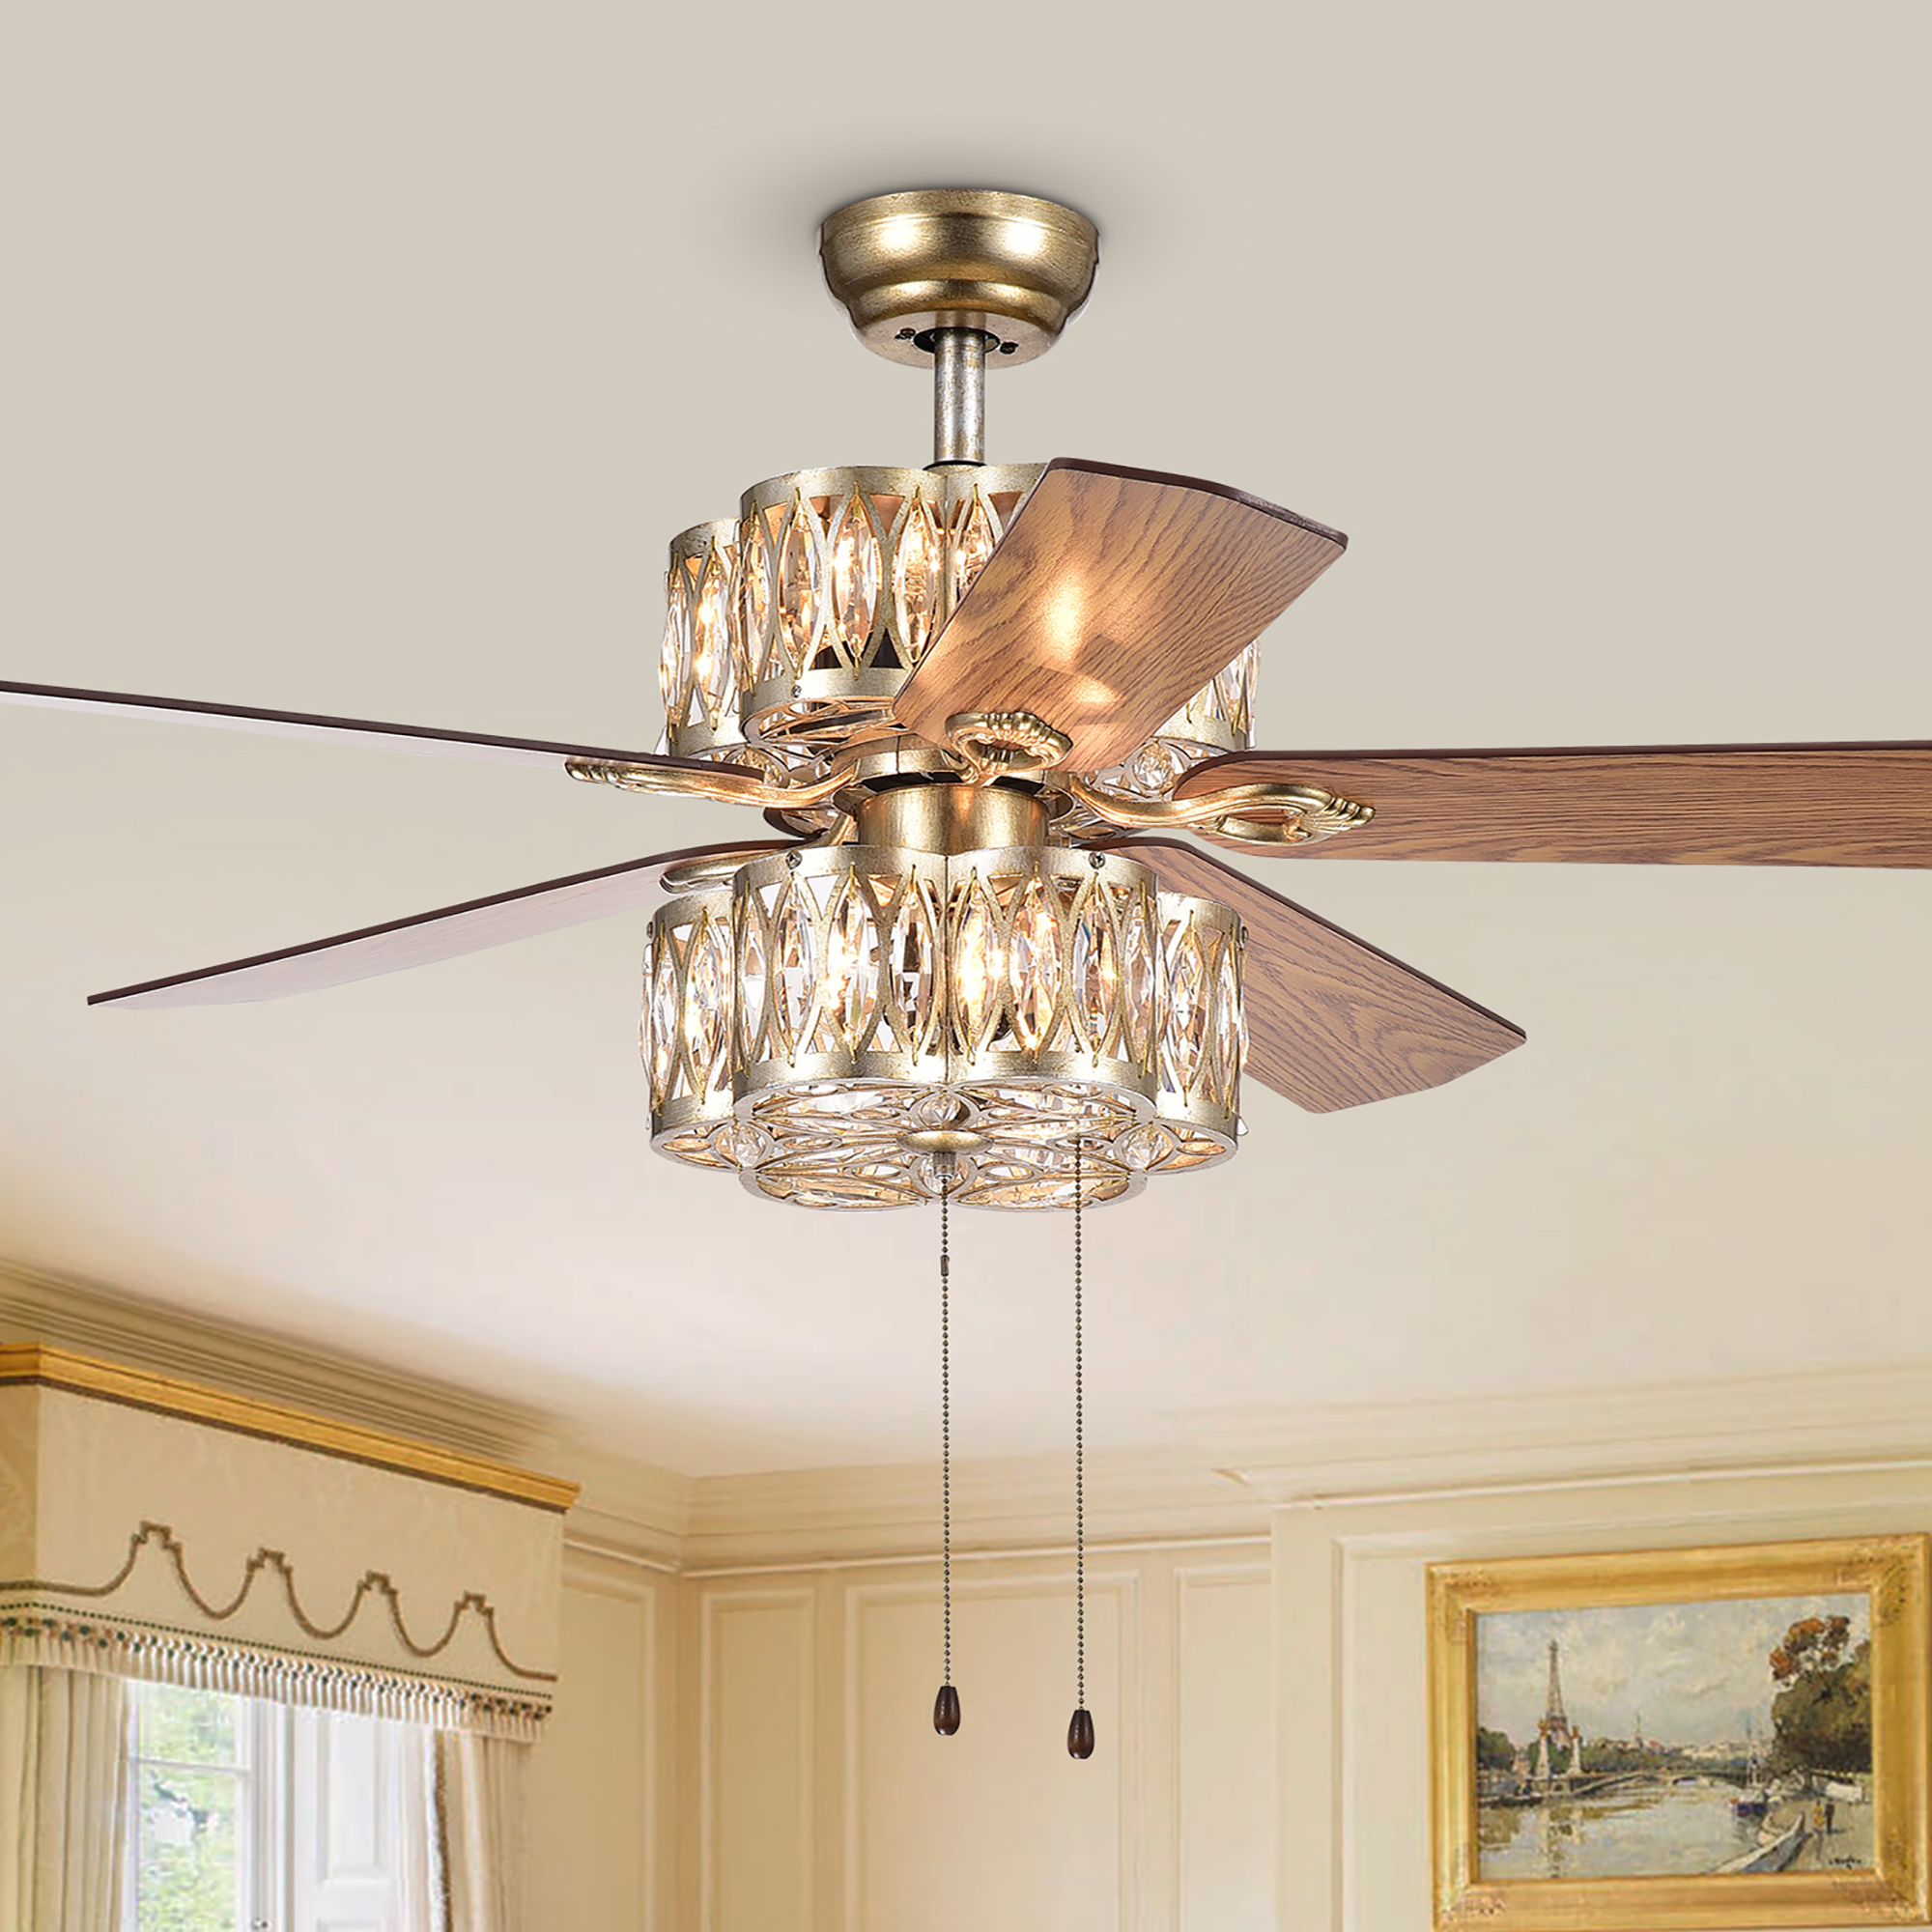 Gaspar Antiqued Silver 52-Inch 5-Blade Ceiling Fan with 2-Tier Lighting